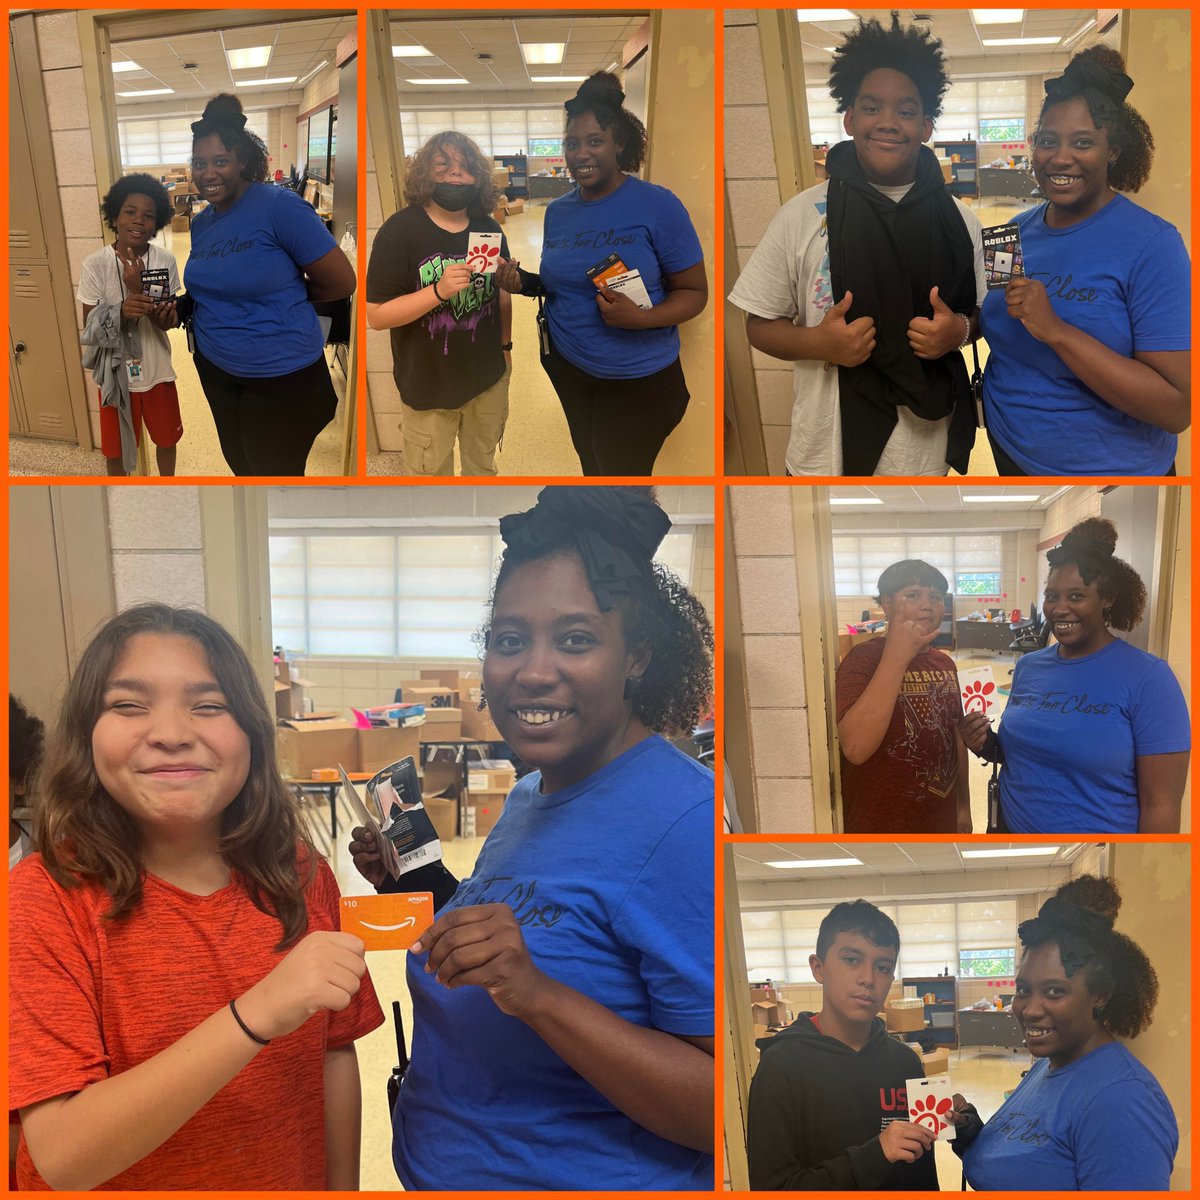 Today's winners from our lunch time trivia winners. These students real know their teachers and staff. @AldineISD @StovallMS_AISD #AldineConnected #SummerSeries #SandersFunded